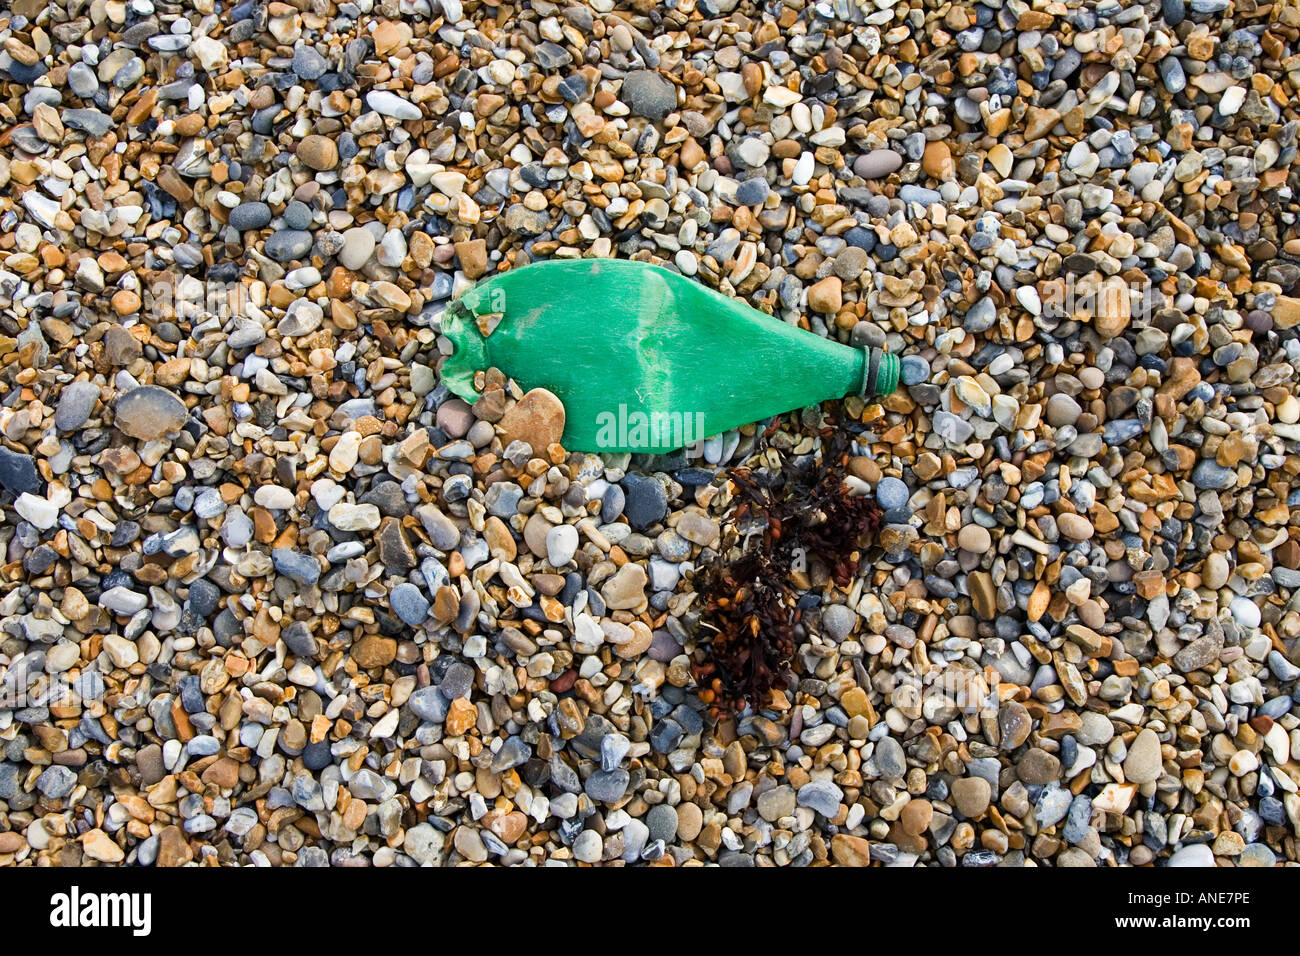 Plastic bottle discarded next to seaweed on Cley Beach Norfolk United Kingdom Stock Photo